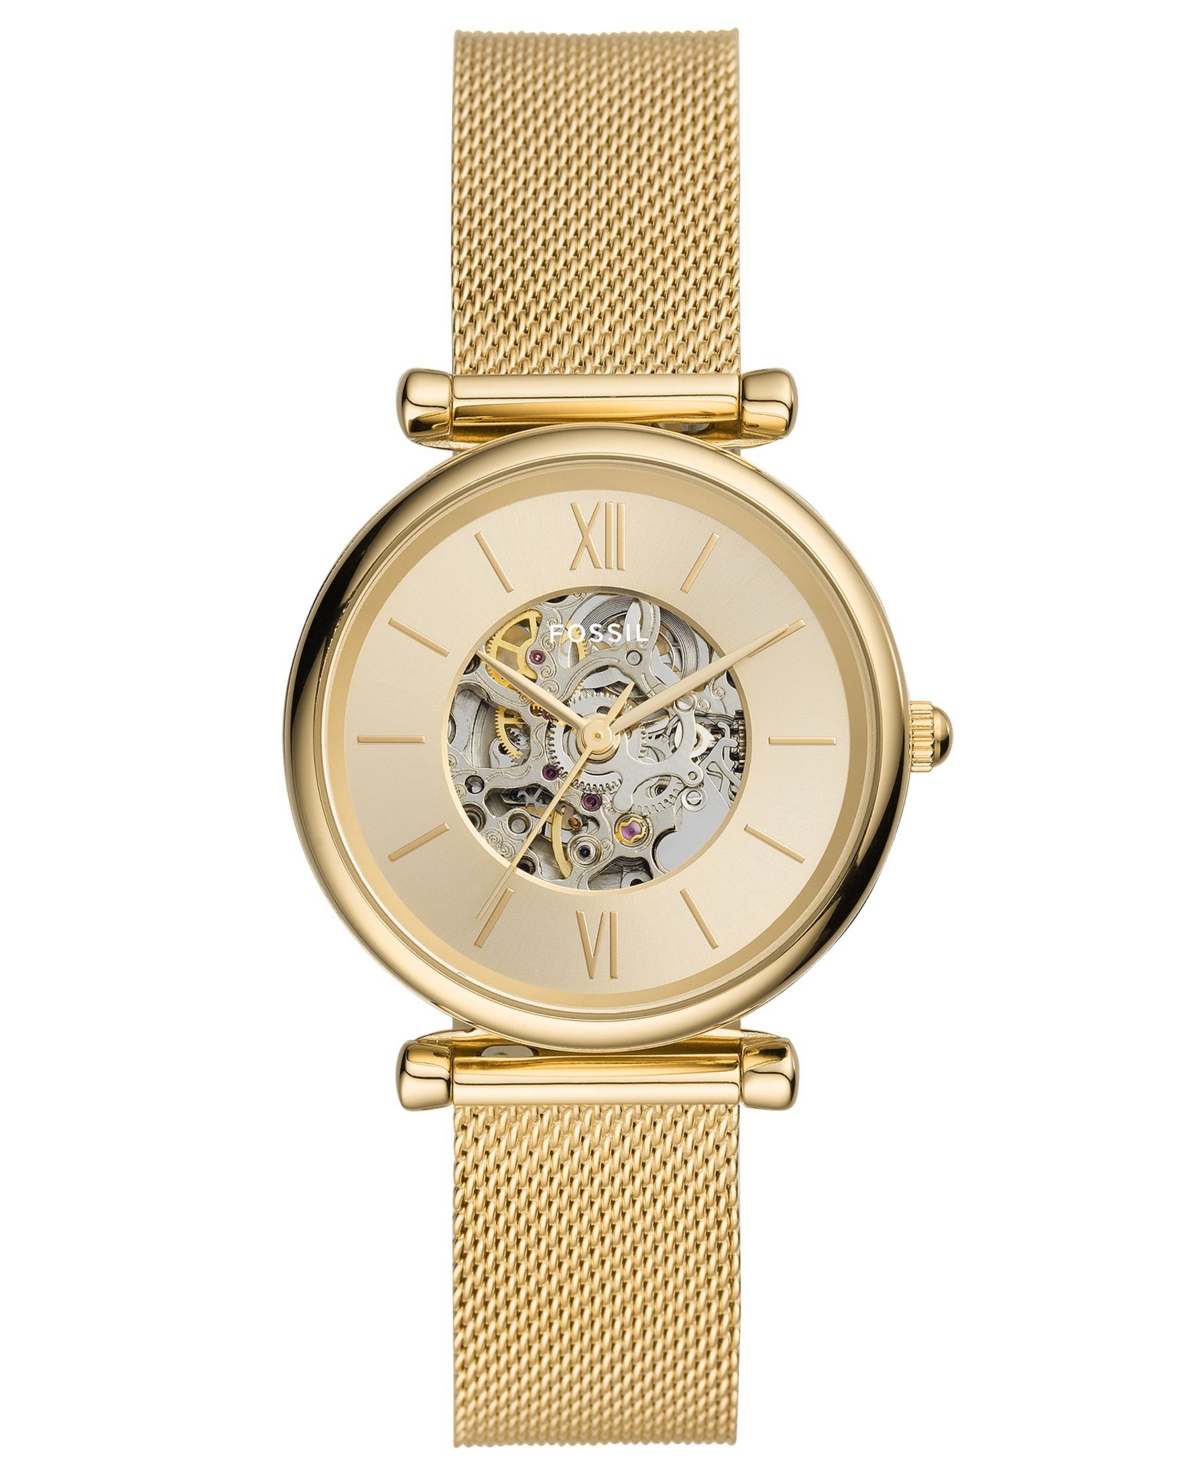 Fossil Women's Carlie Automatic Gold-tone Stainless Steel Mesh Watch, 35mm In Gold Tone